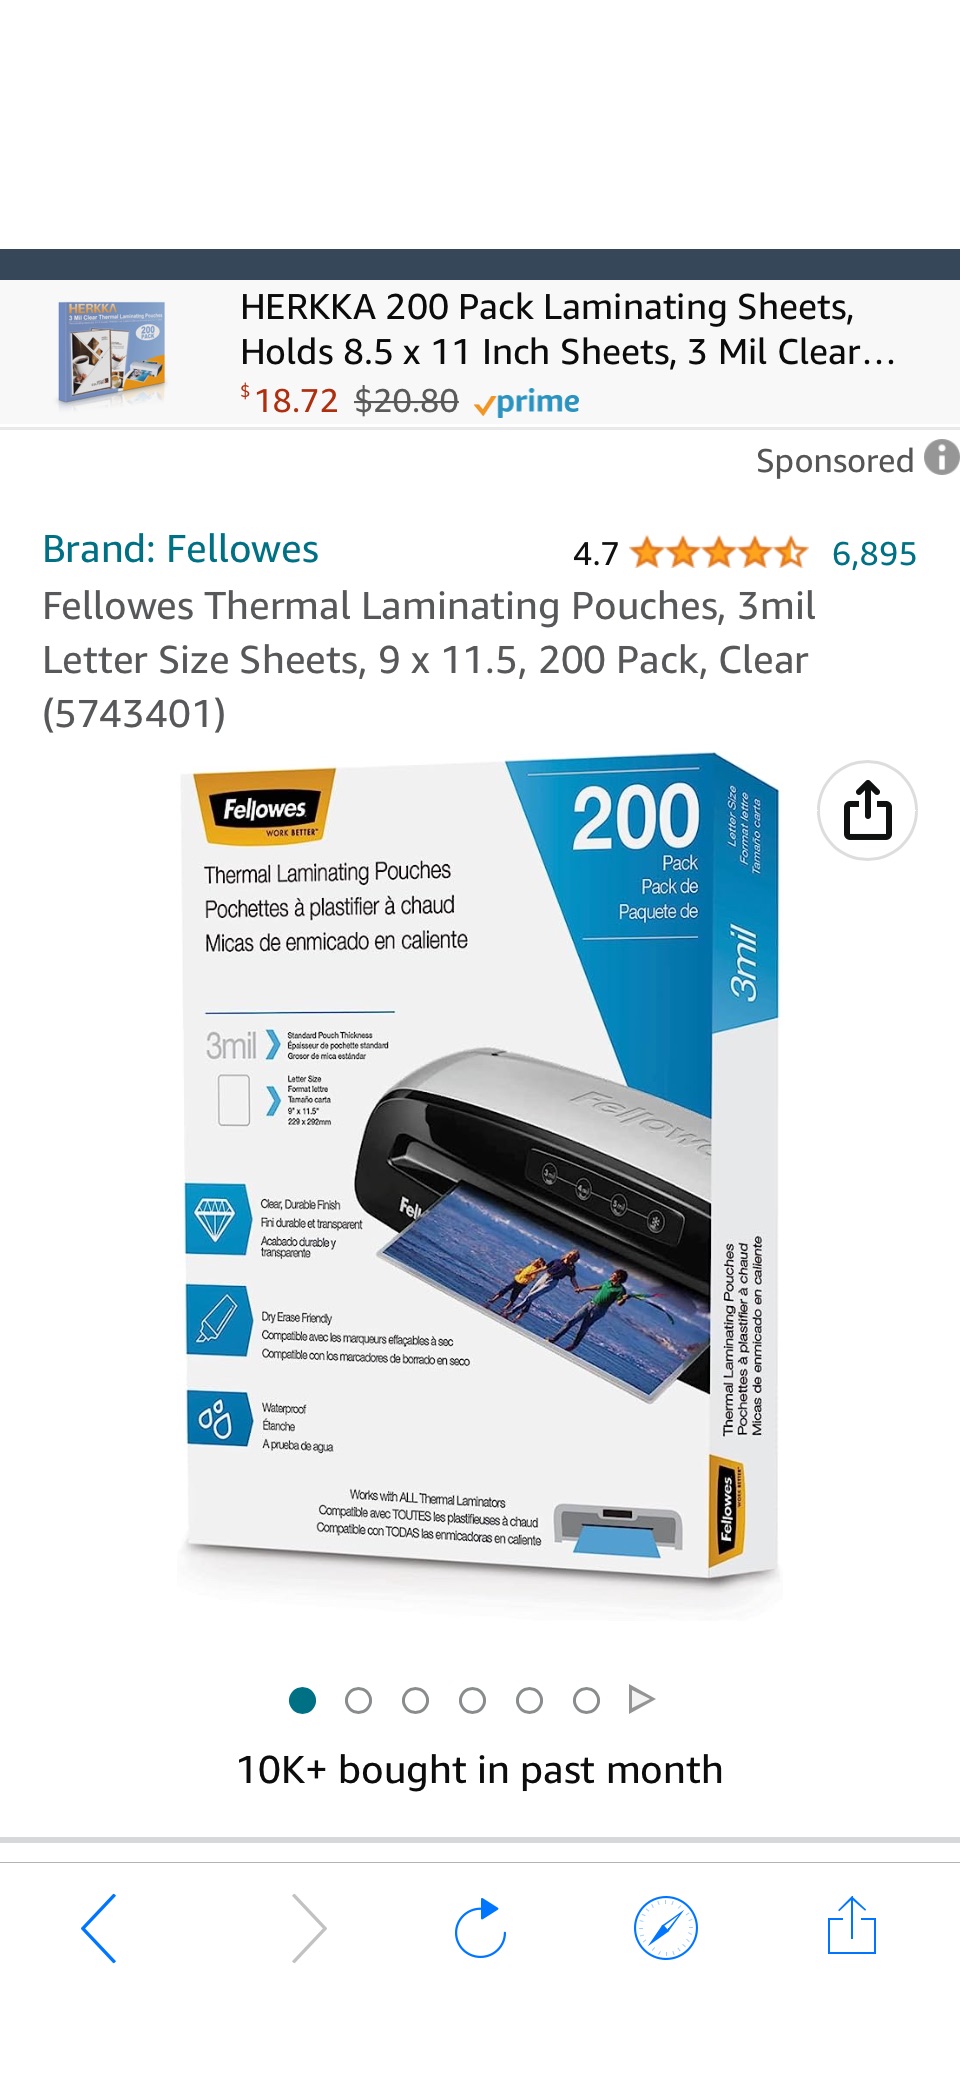 Amazon.com : Fellowes Thermal Laminating Pouches, 3mil Letter Size Sheets, 9 x 11.5, 200 Pack, Clear (5743401) : Office Products原价69.99